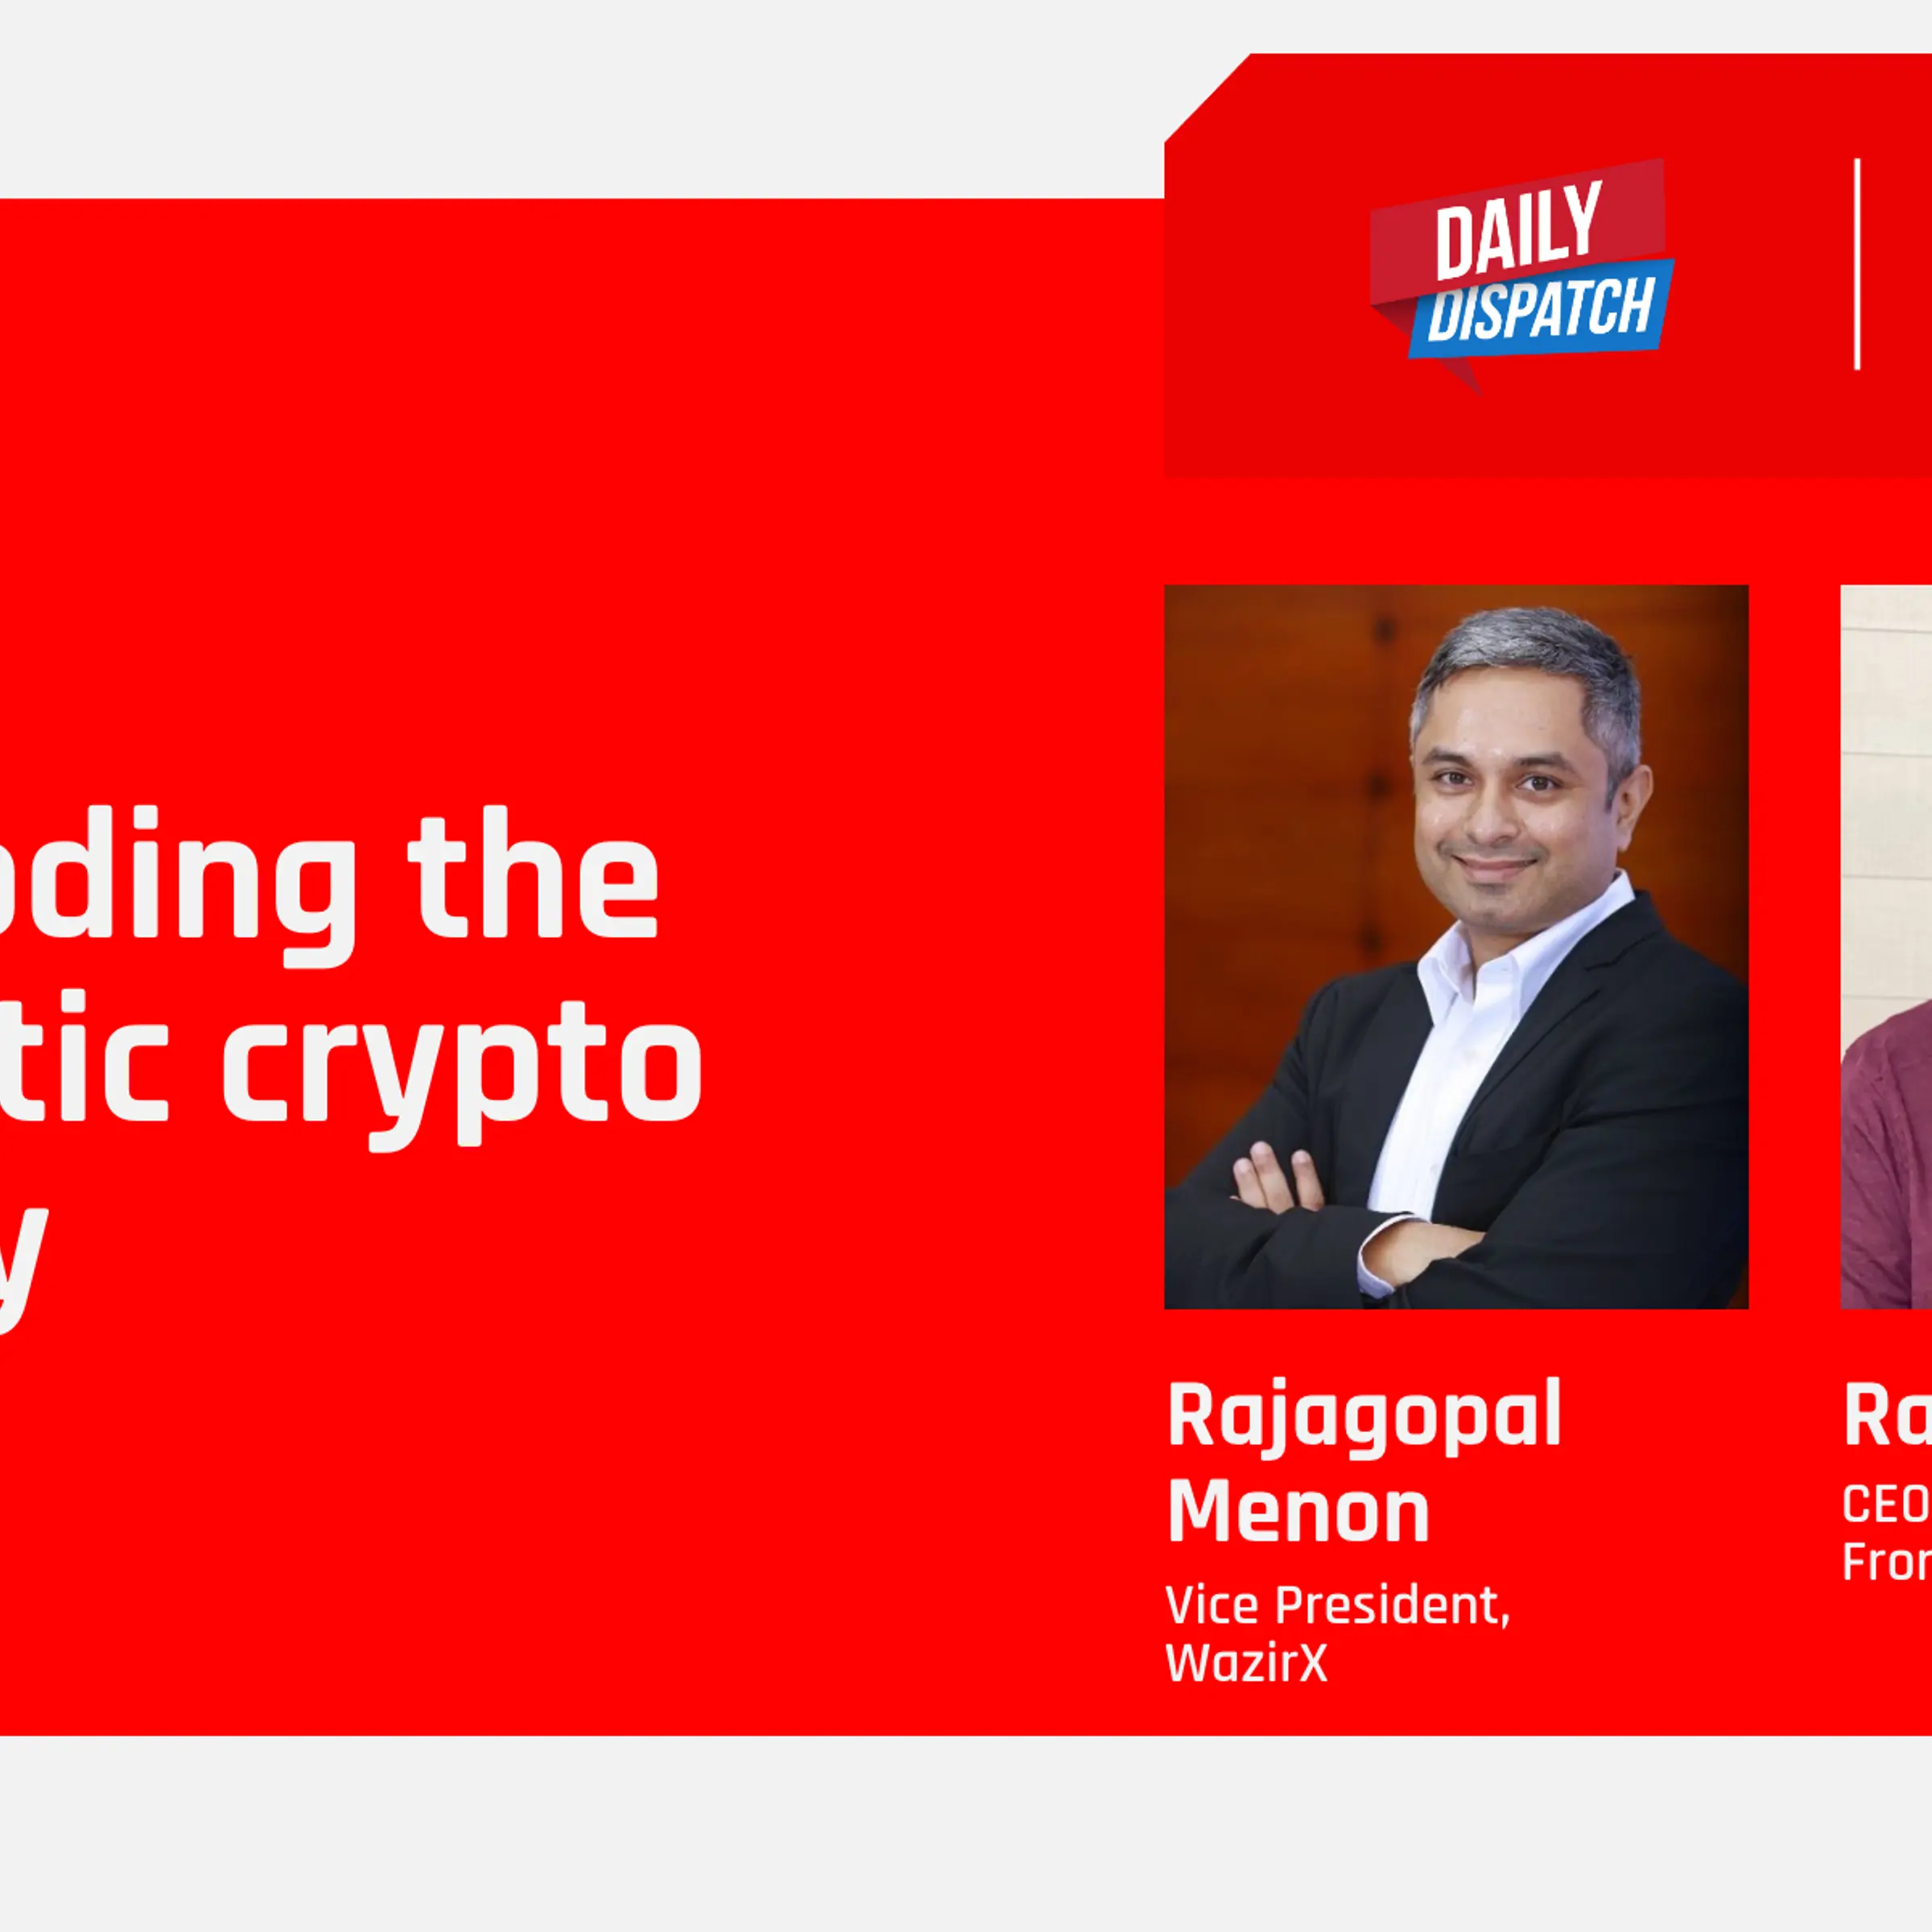 Decrypting the crypto story: emerging trends and opportunities in the Indian market
